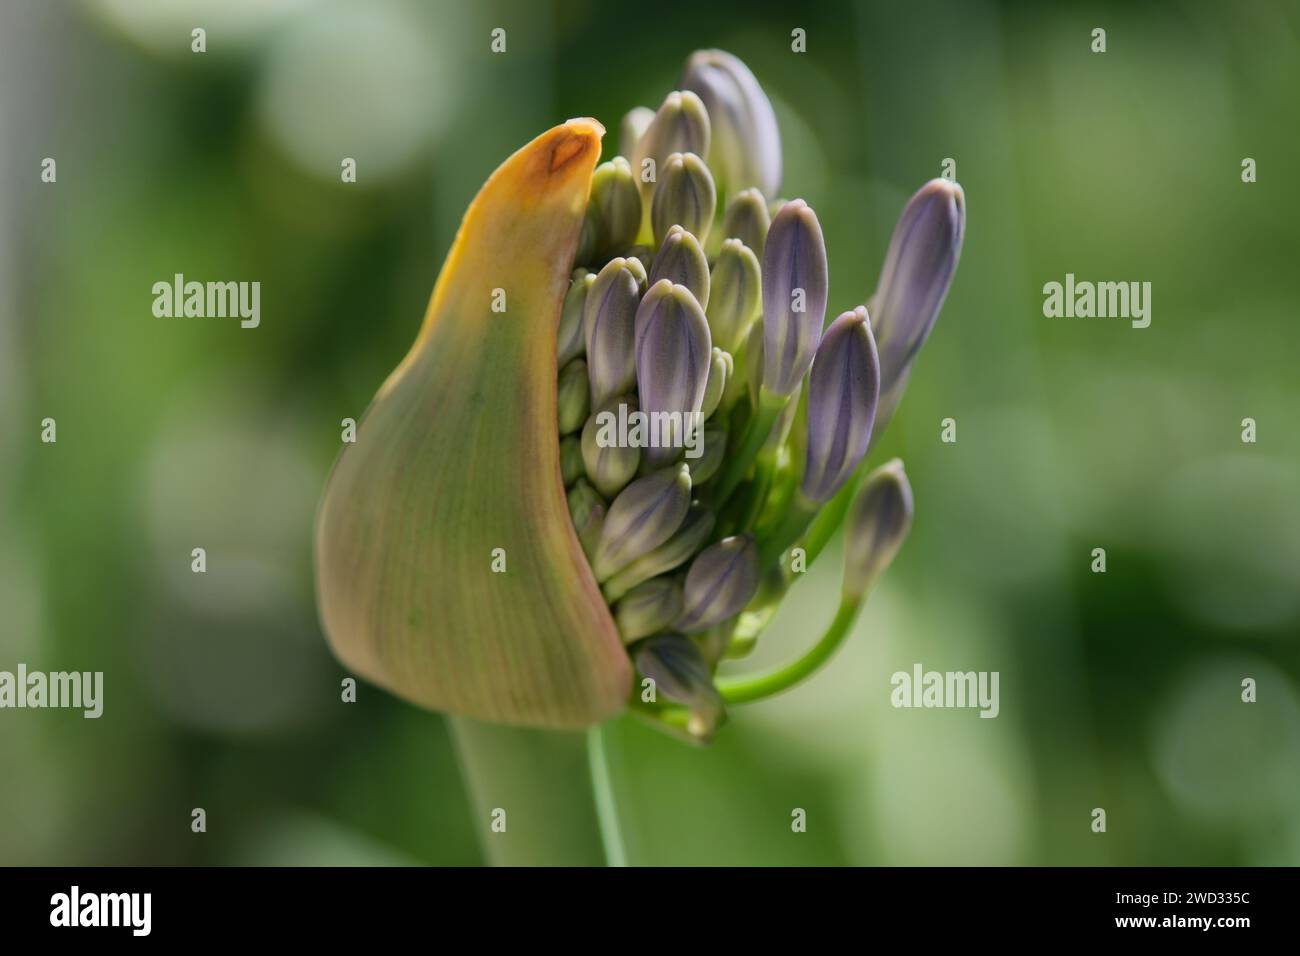 Close-up of a bud of Agapanthus africana (African lily) from which inflorescences with blue flowers appear Stock Photo